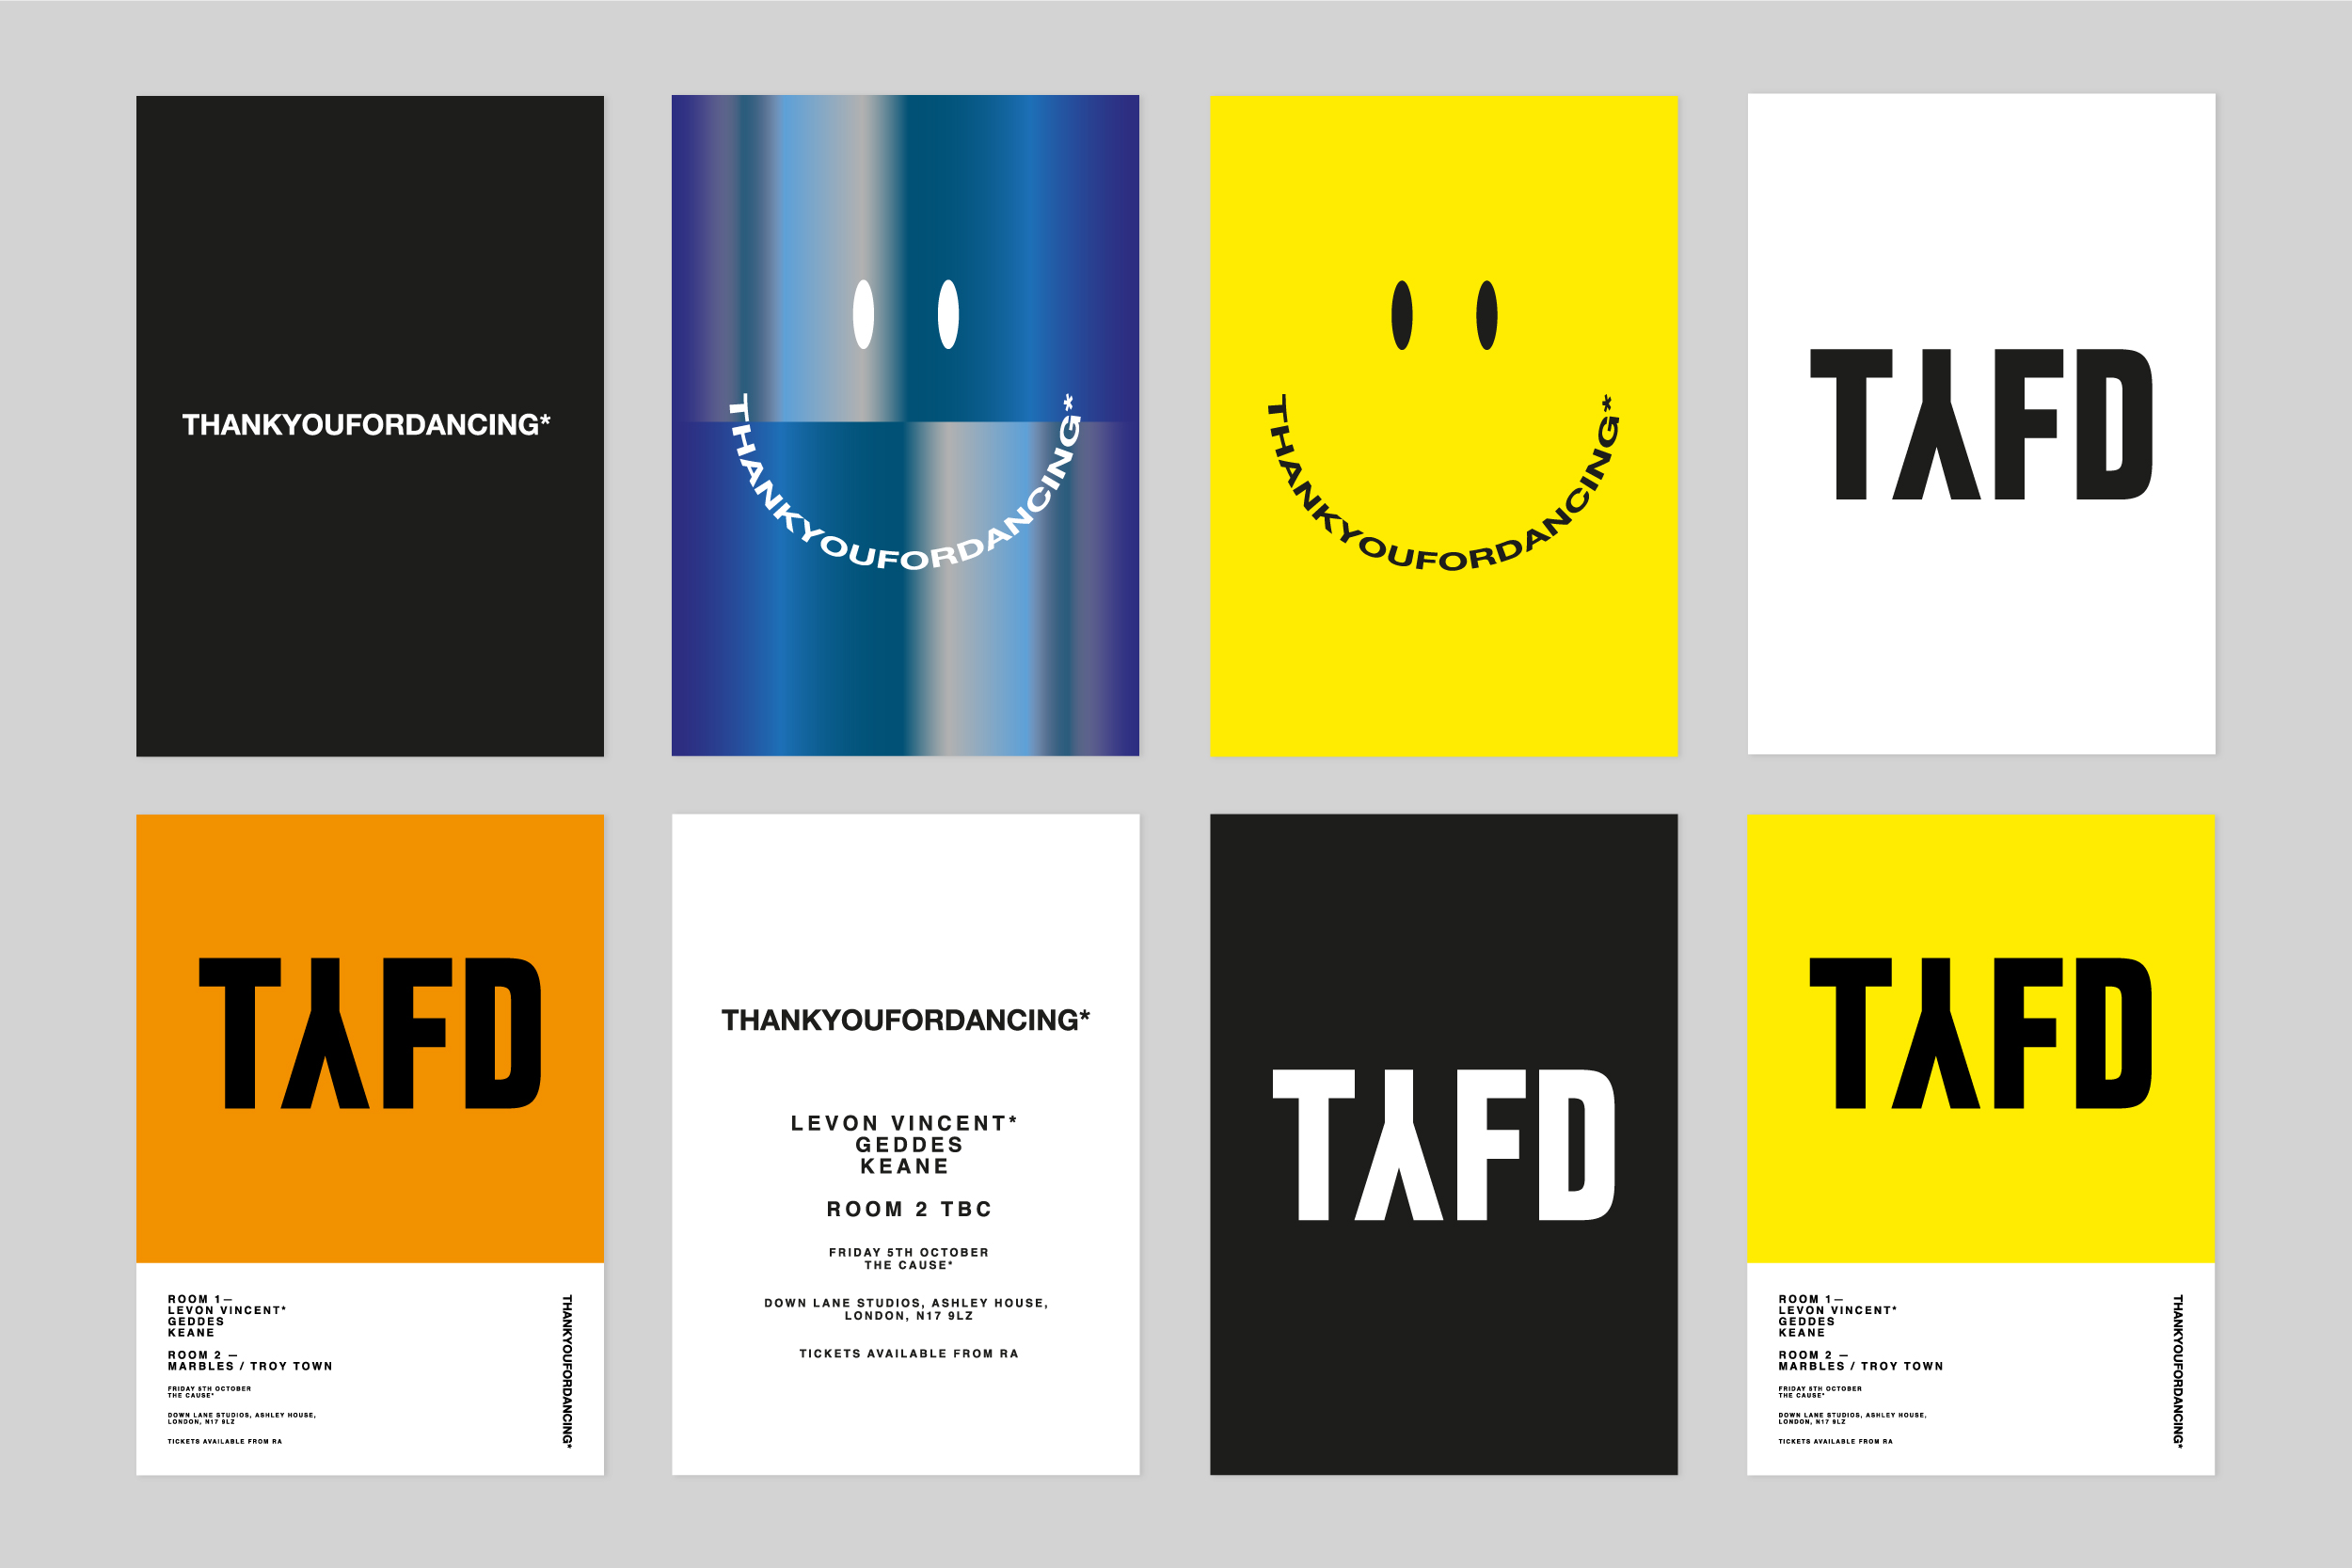 TYFD_Poster_Layout_